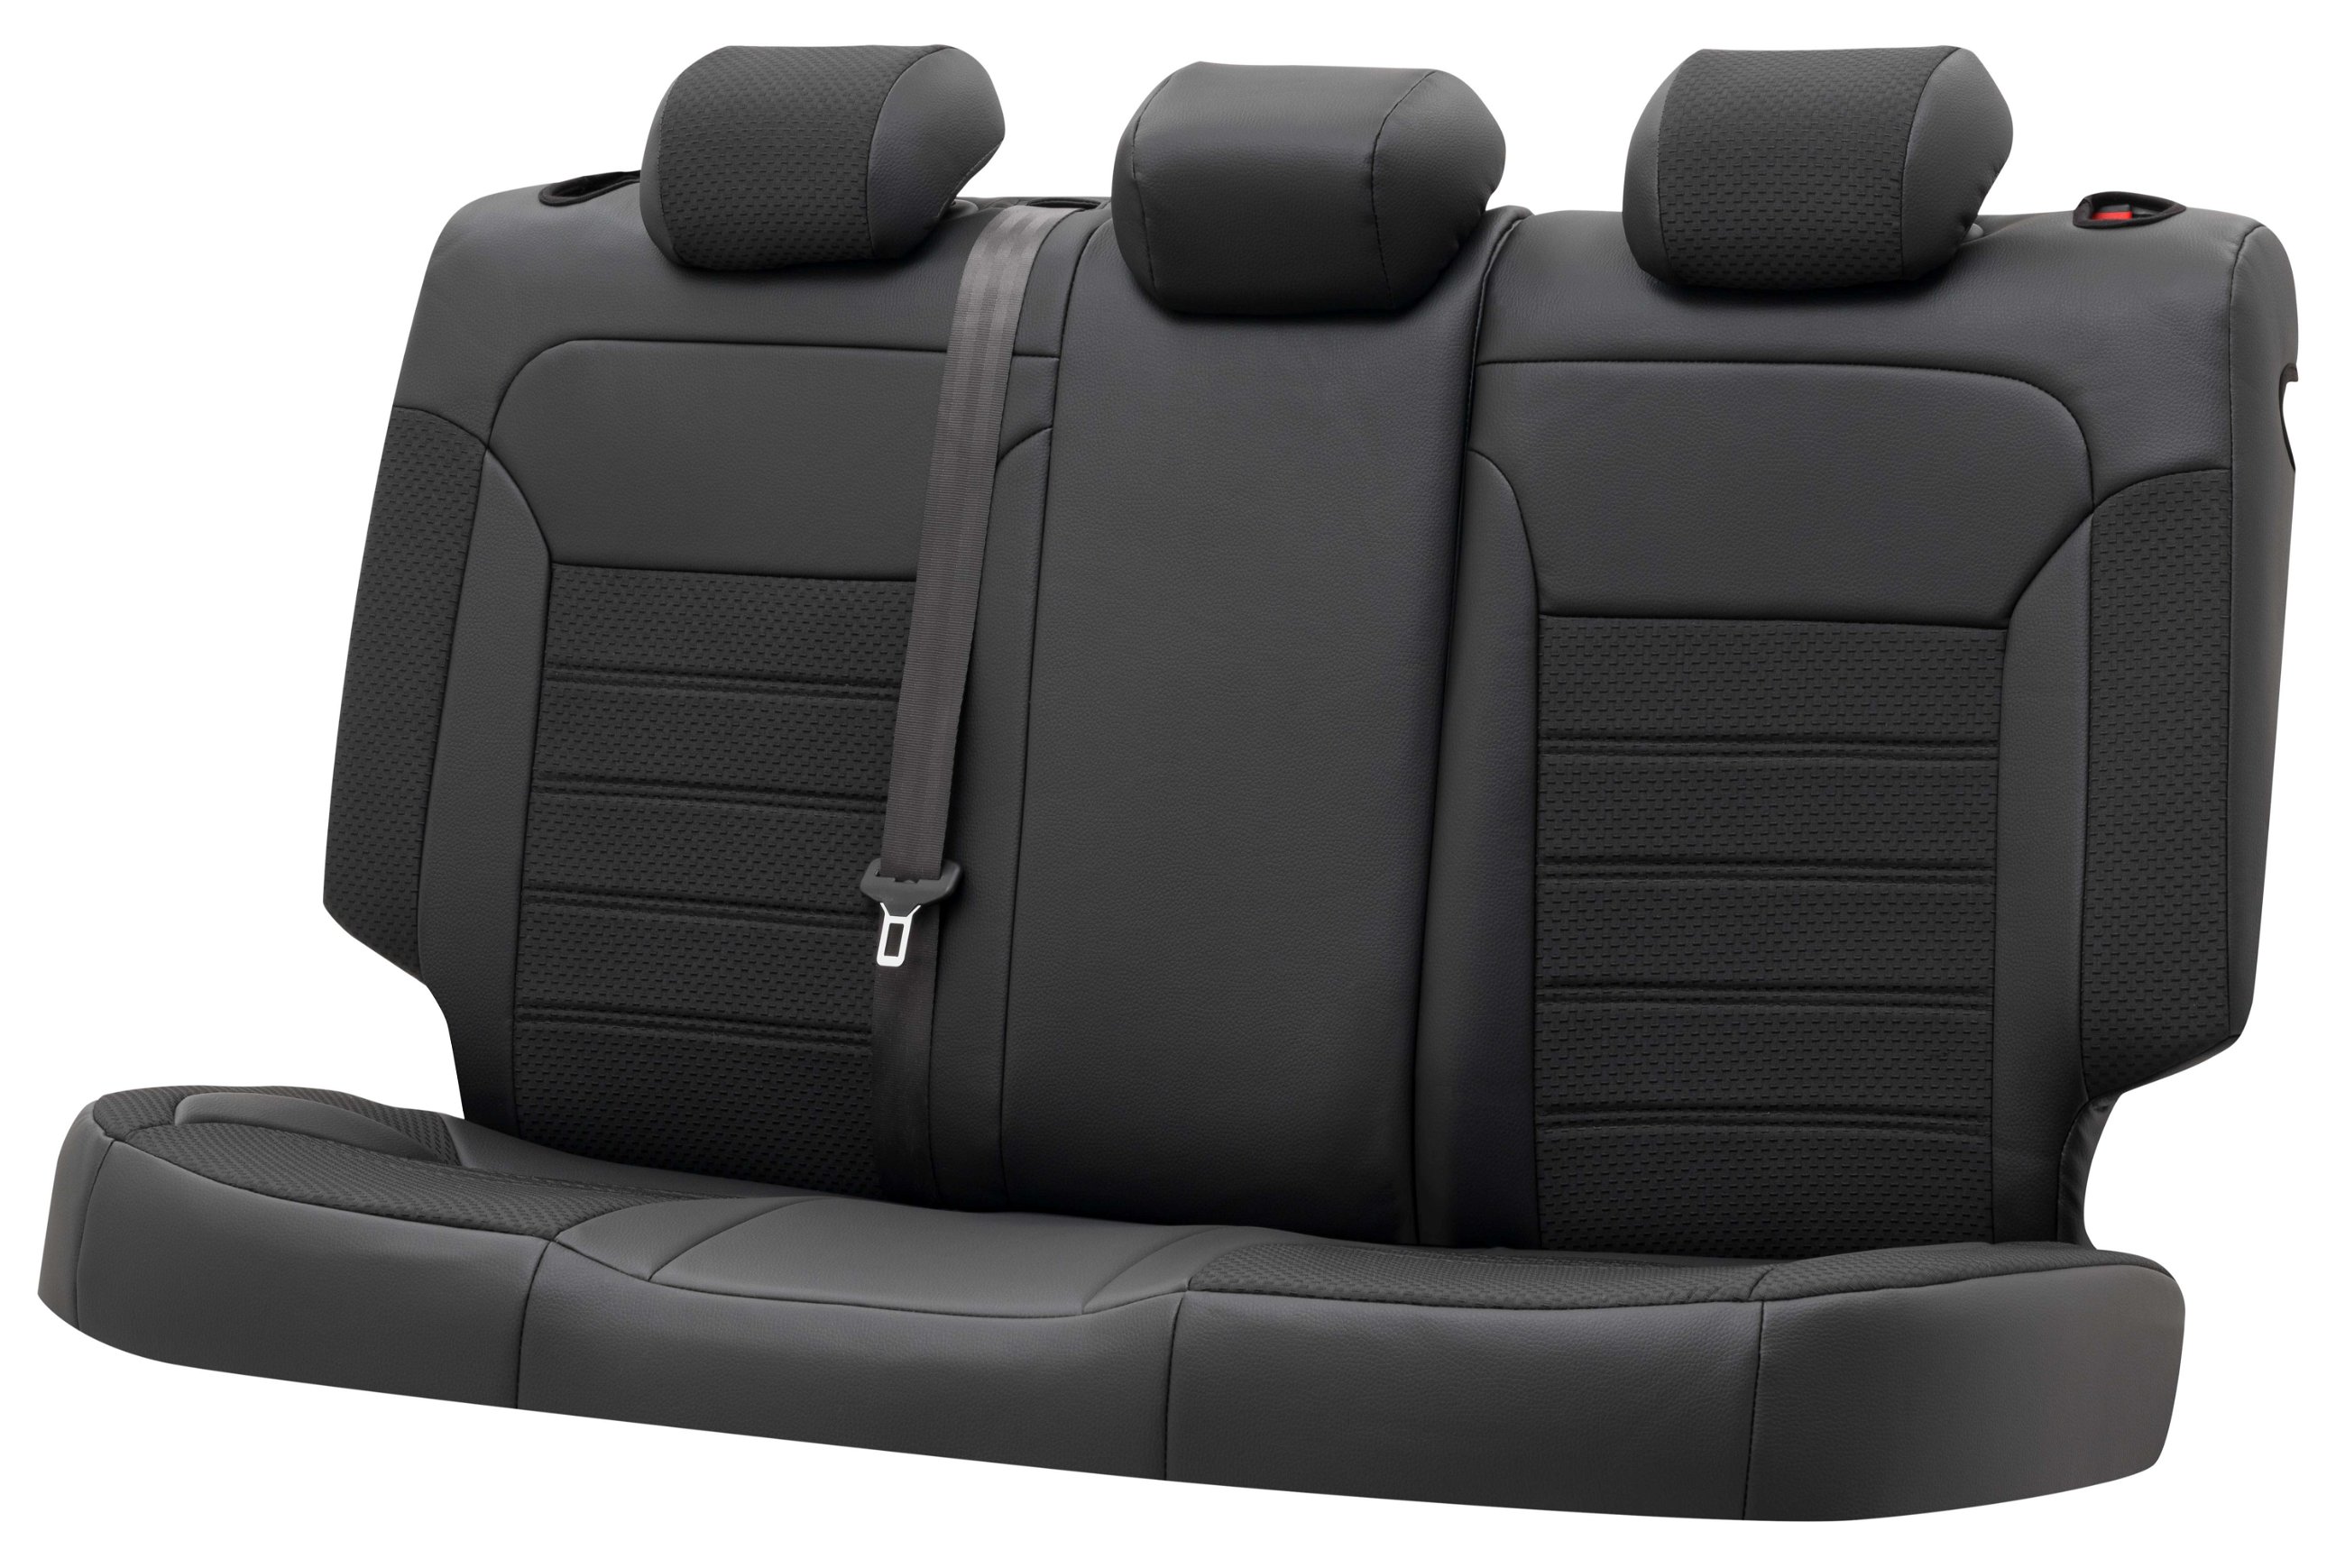 Seat cover Expedit for Ford Fiesta 2017-Today, 1 rear seat cover for normal seats